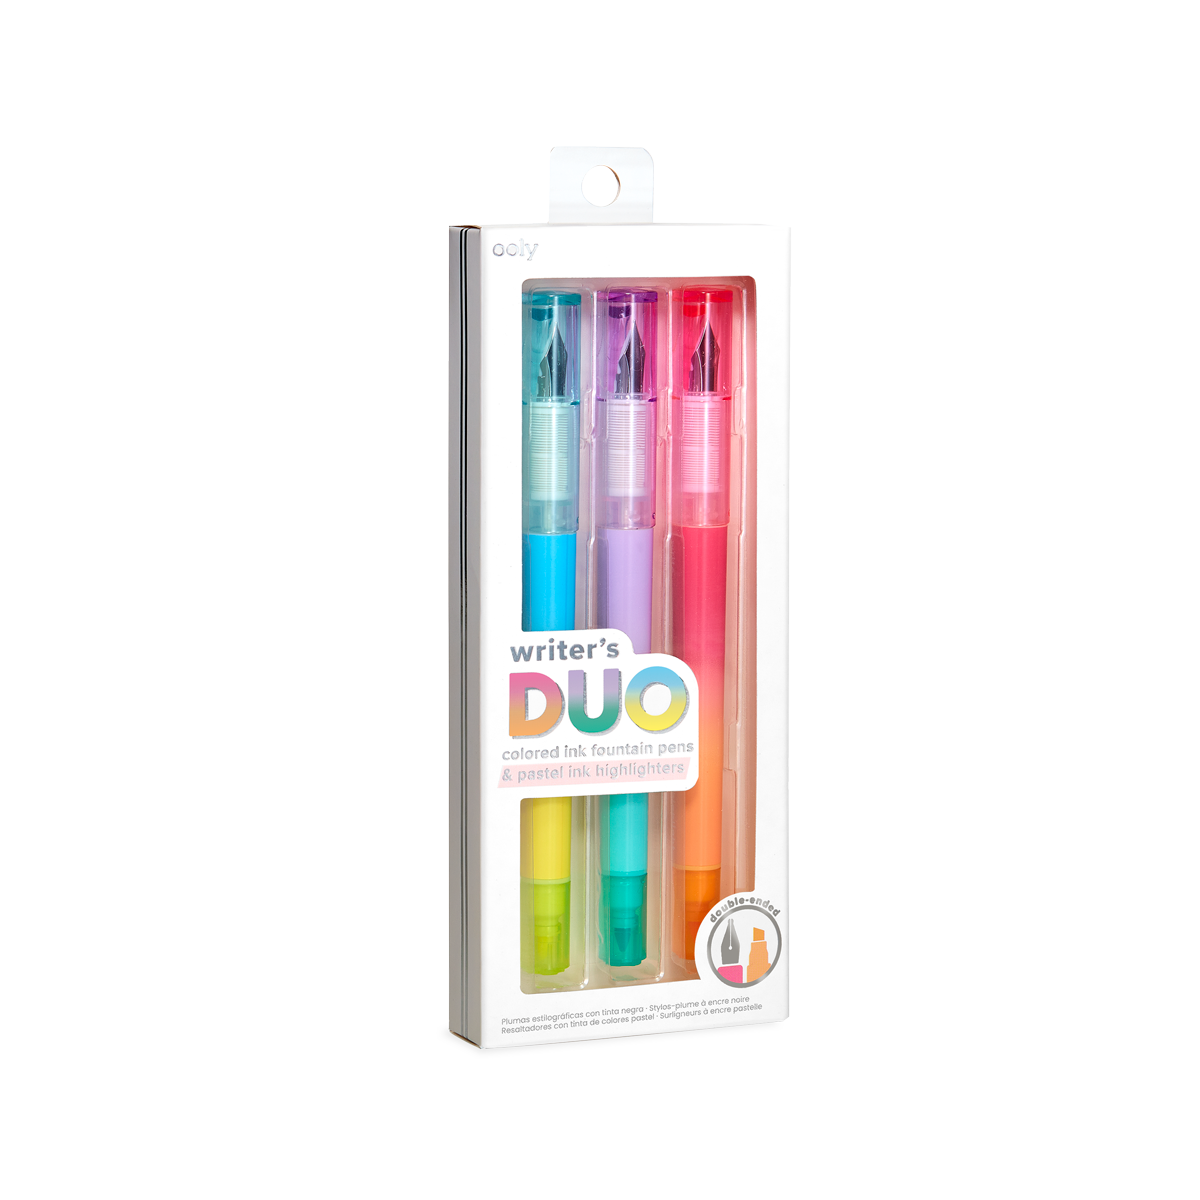 Writer's Duo 2 in 1 Fountain Pens + Highlighters in packaging